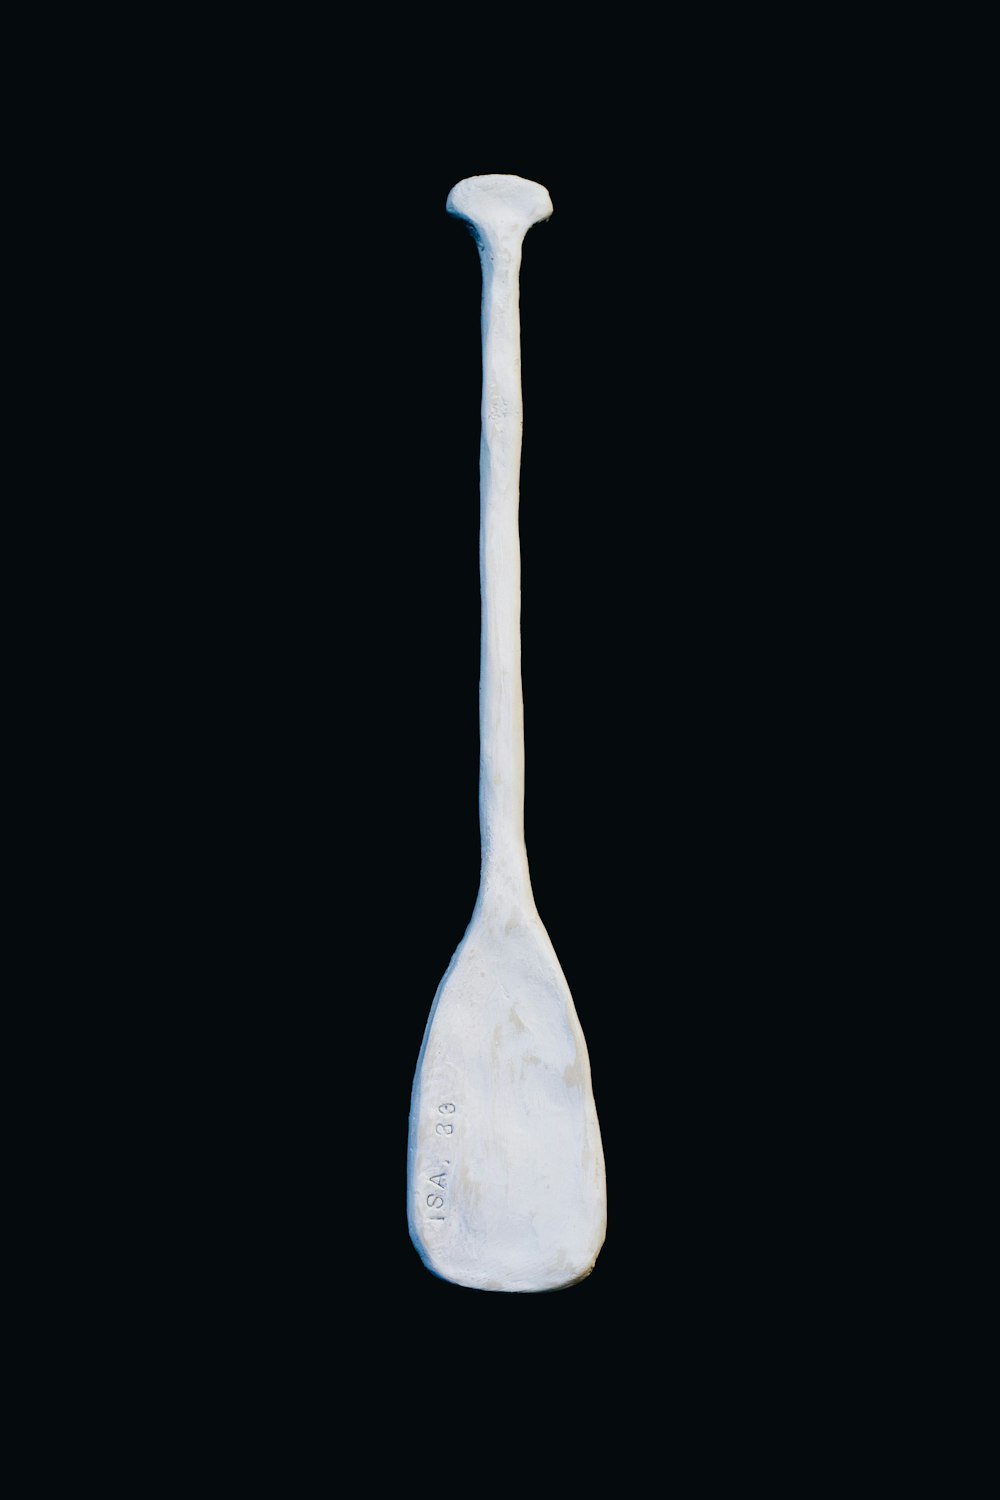 a white spoon with a long handle on a black background